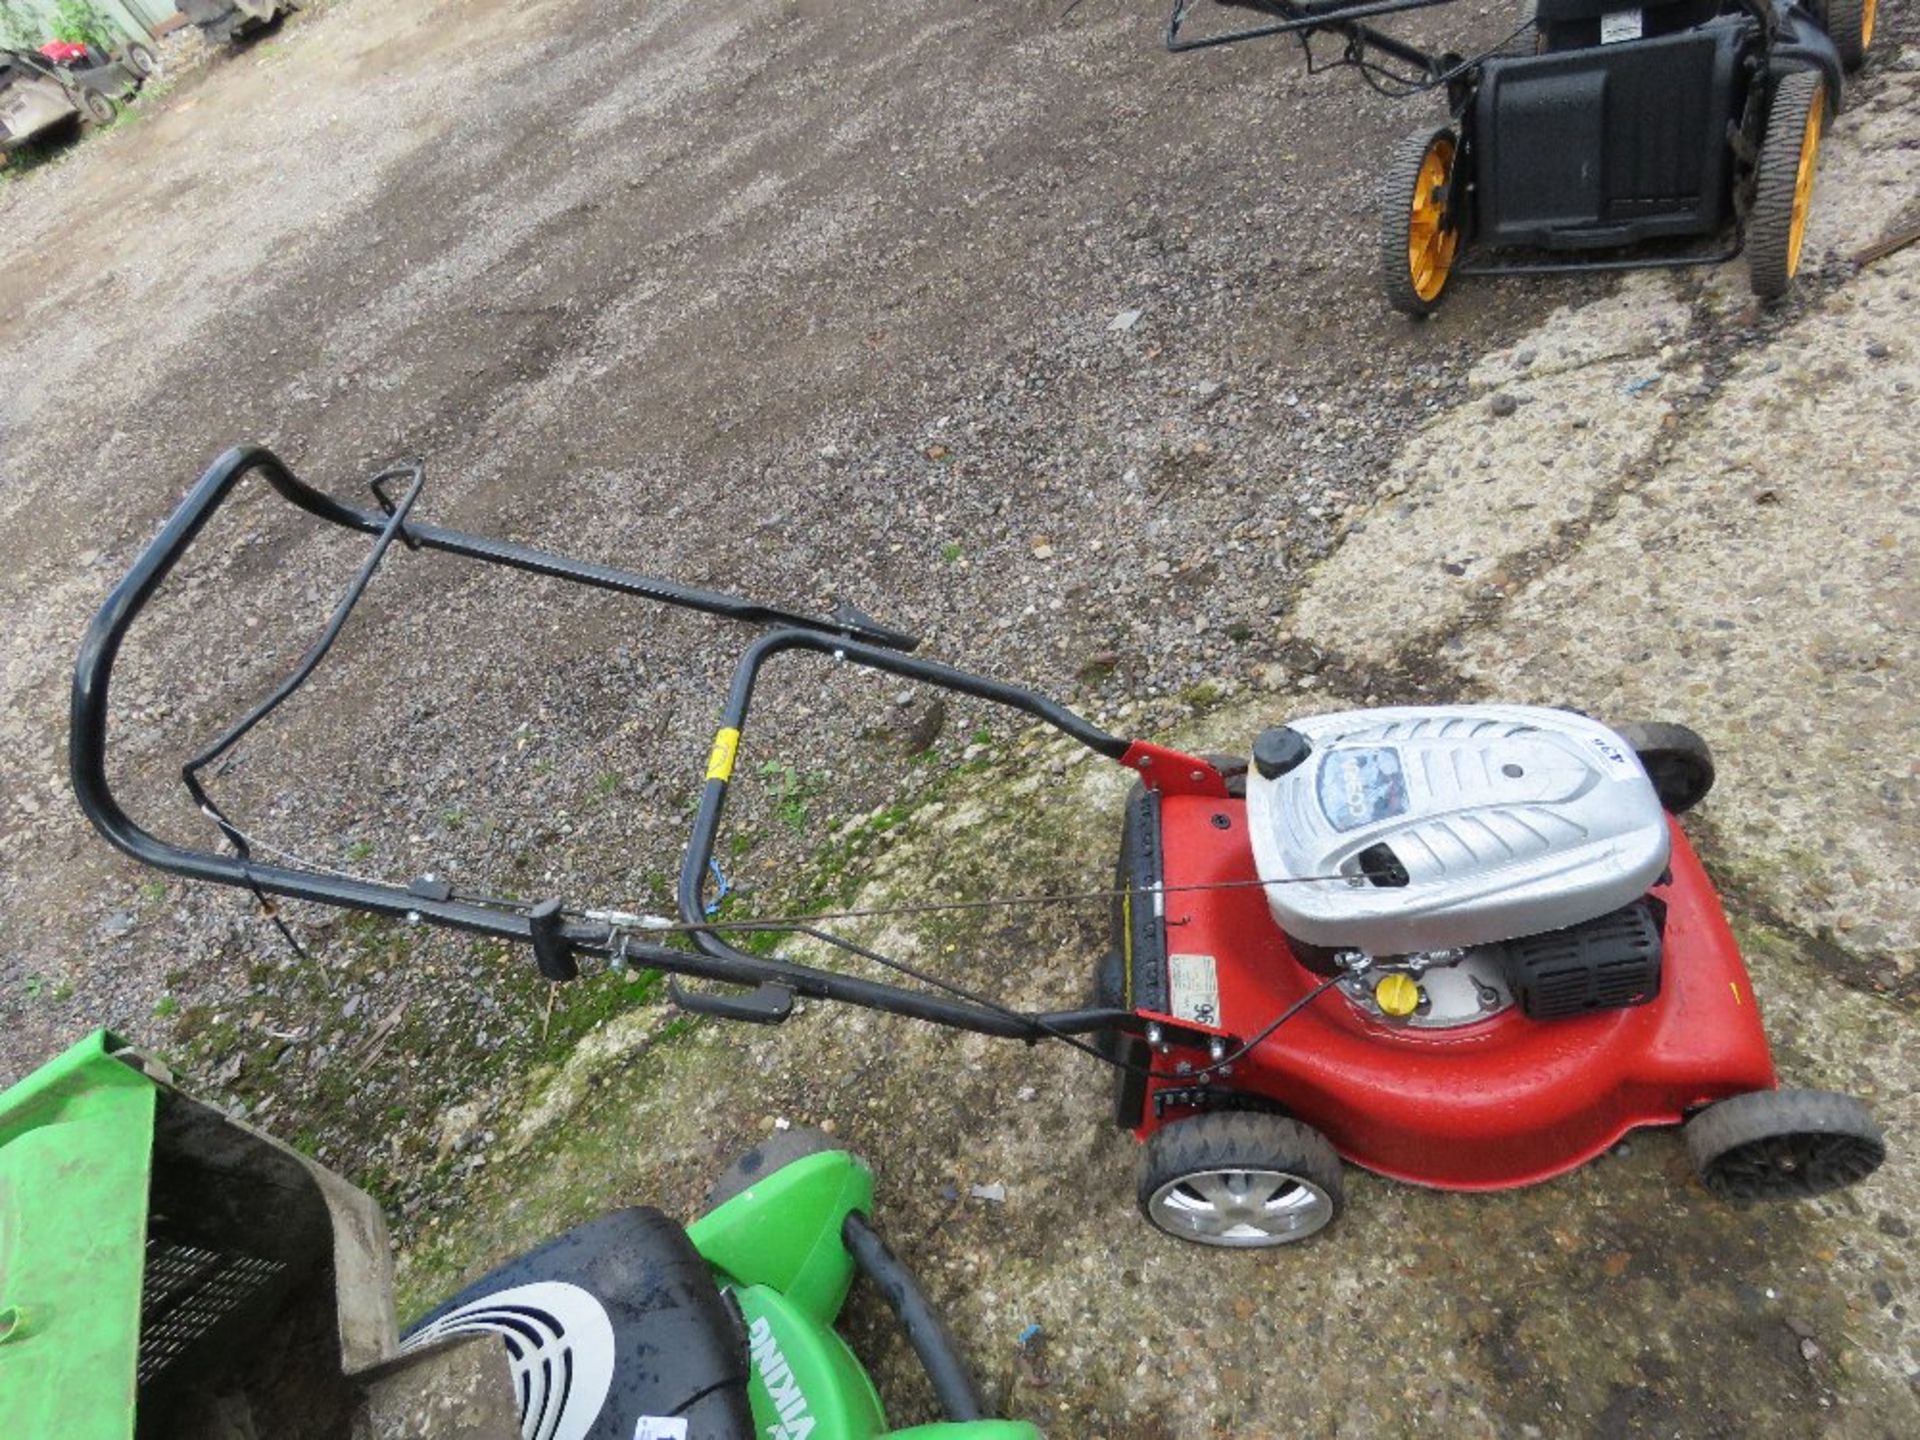 COBRA PETROL ENGINED ROTARY LAWNMOWER. NO COLLECTOR. THIS LOT IS SOLD UNDER THE AUCTIONEERS MARG